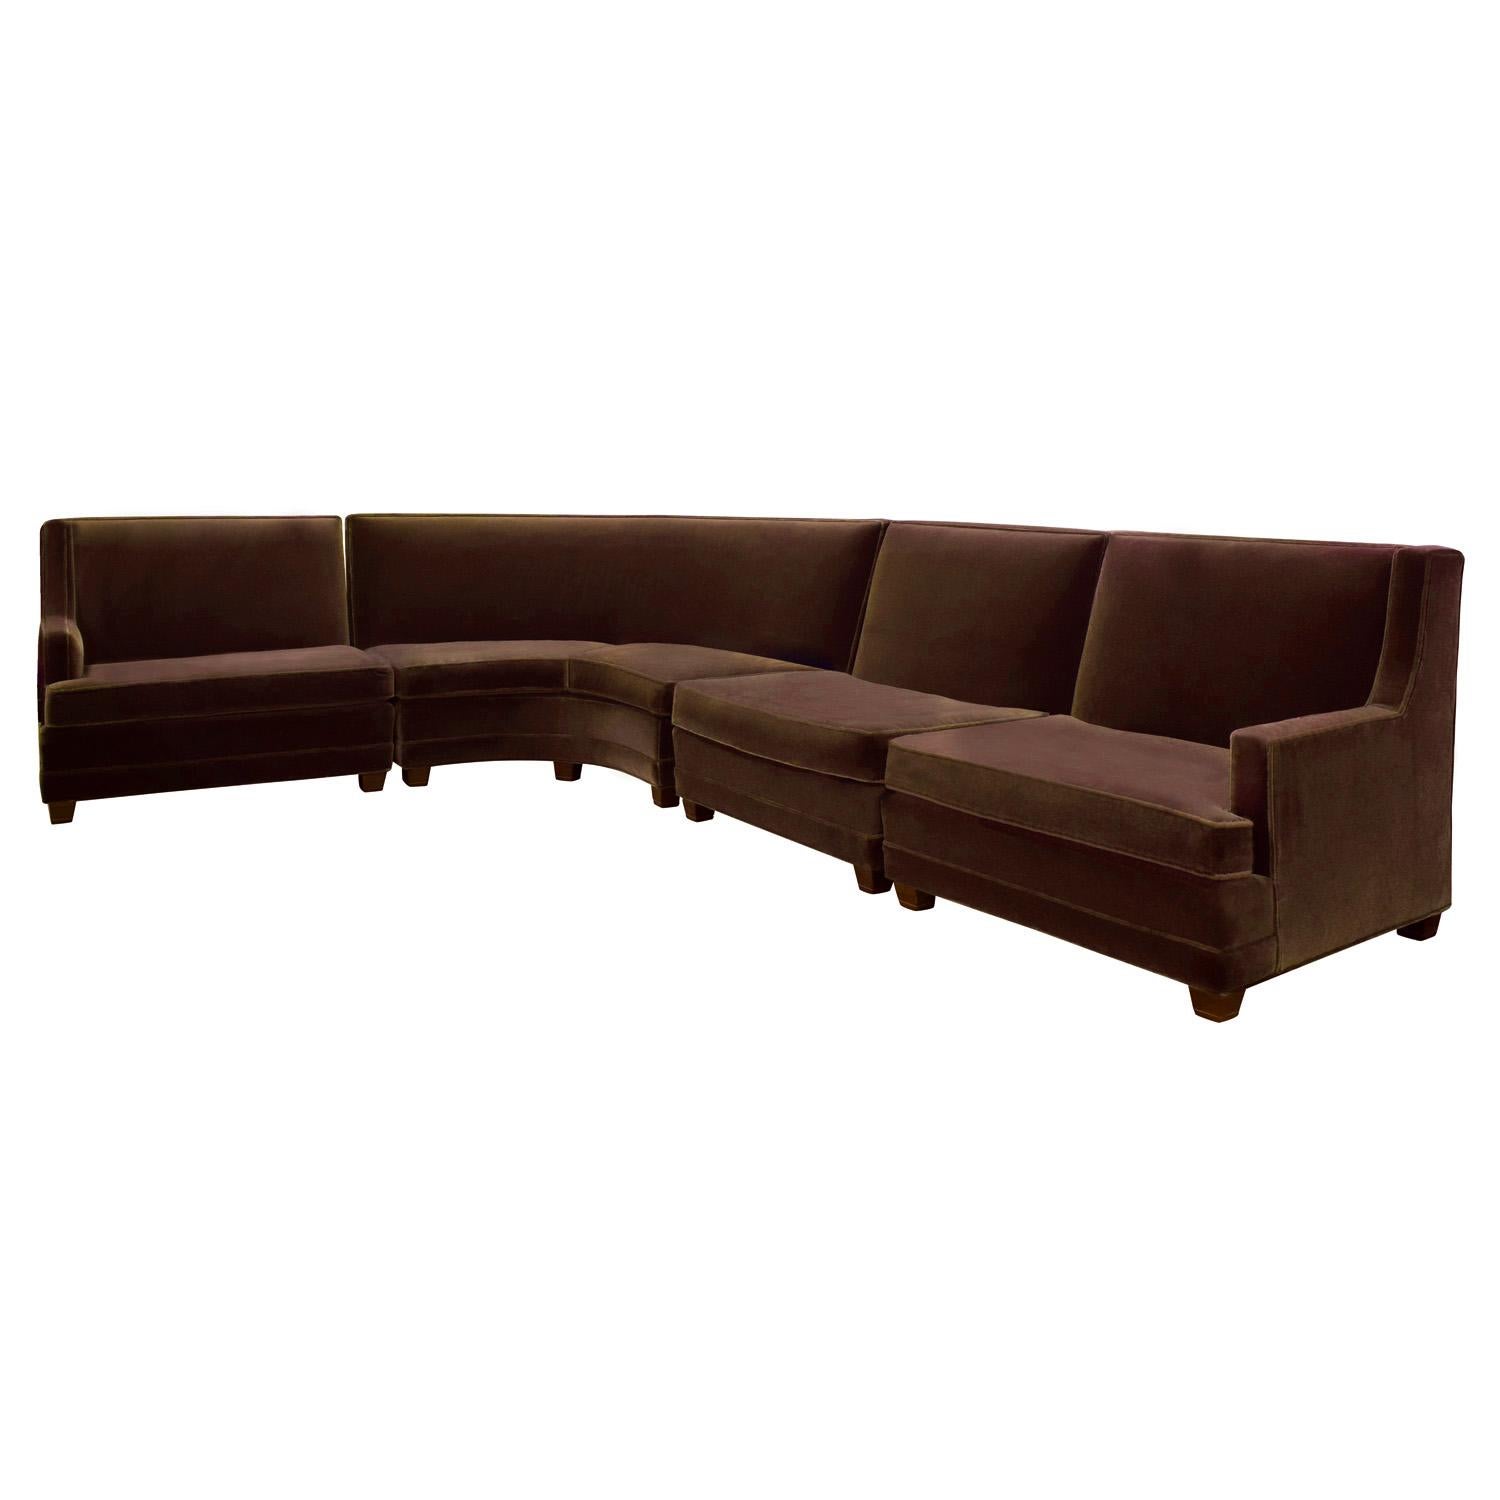 Curved 4 piece modular sofa with mahogany legs, custom design, American 1940's. This sofa allows you to configure it in multiple ways with the slipper chair separate if that suits your furniture plan. Either side can be the long side with the